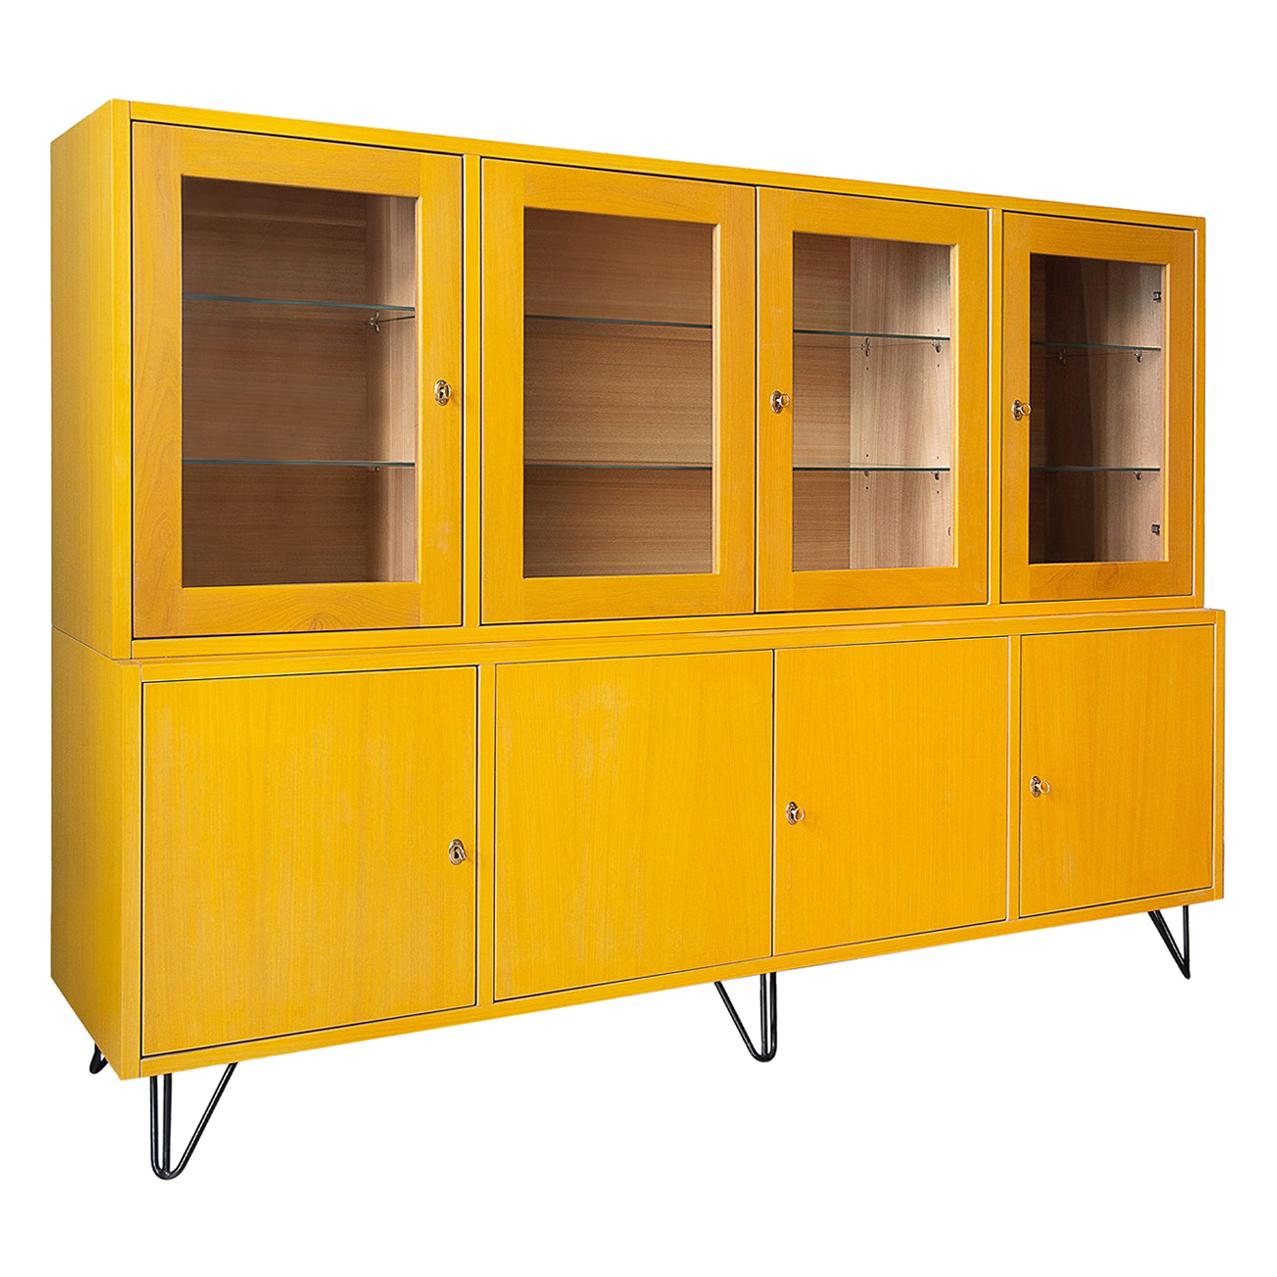 50s-style Yellow Cabinet